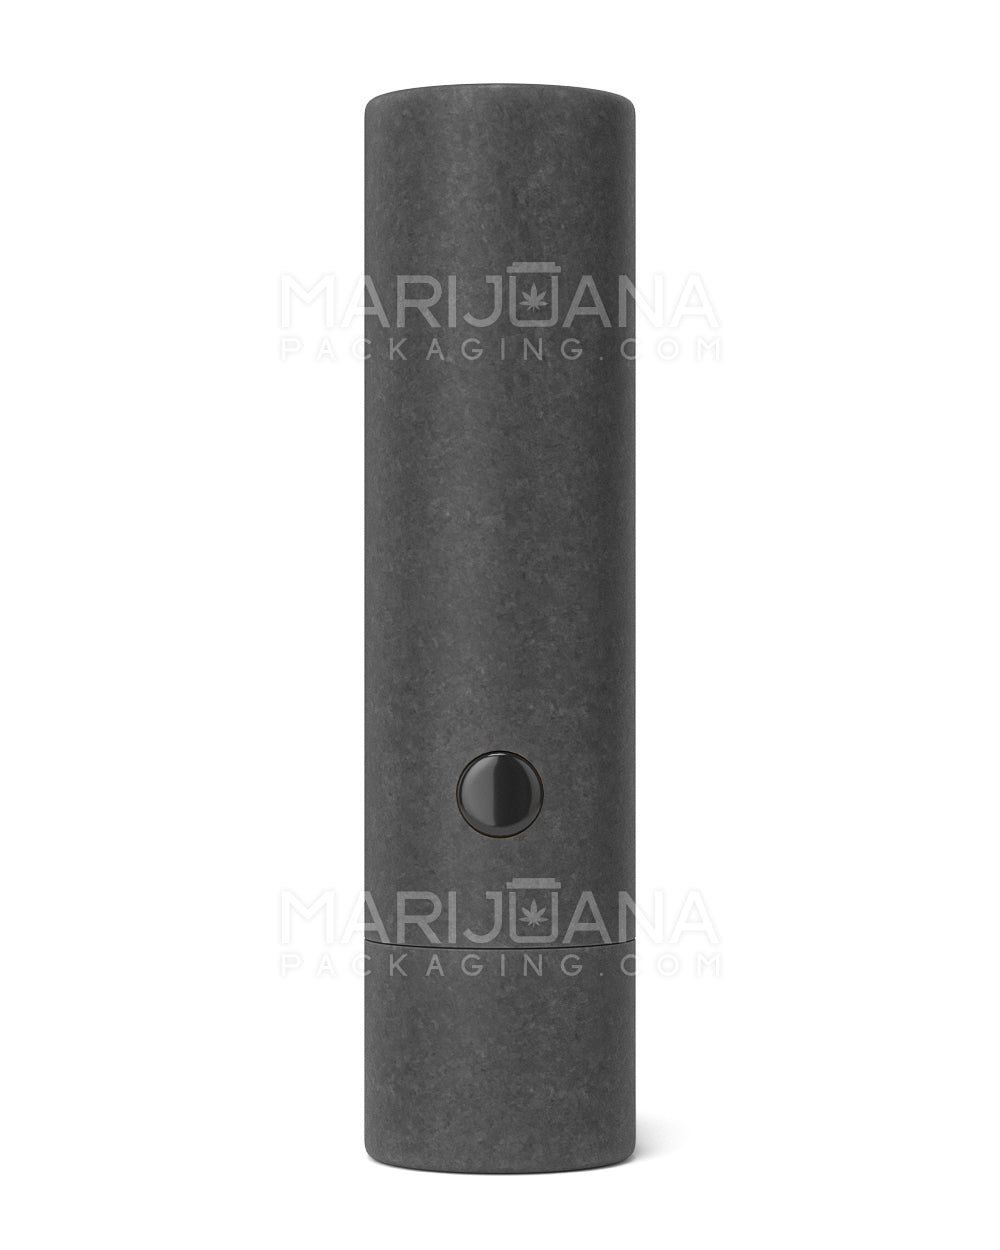 Child Resistant & Sustainable 100% Recyclable Cardboard Vape Cartridge Tube w/ Press Button | 95mm - Black | Sample - 1